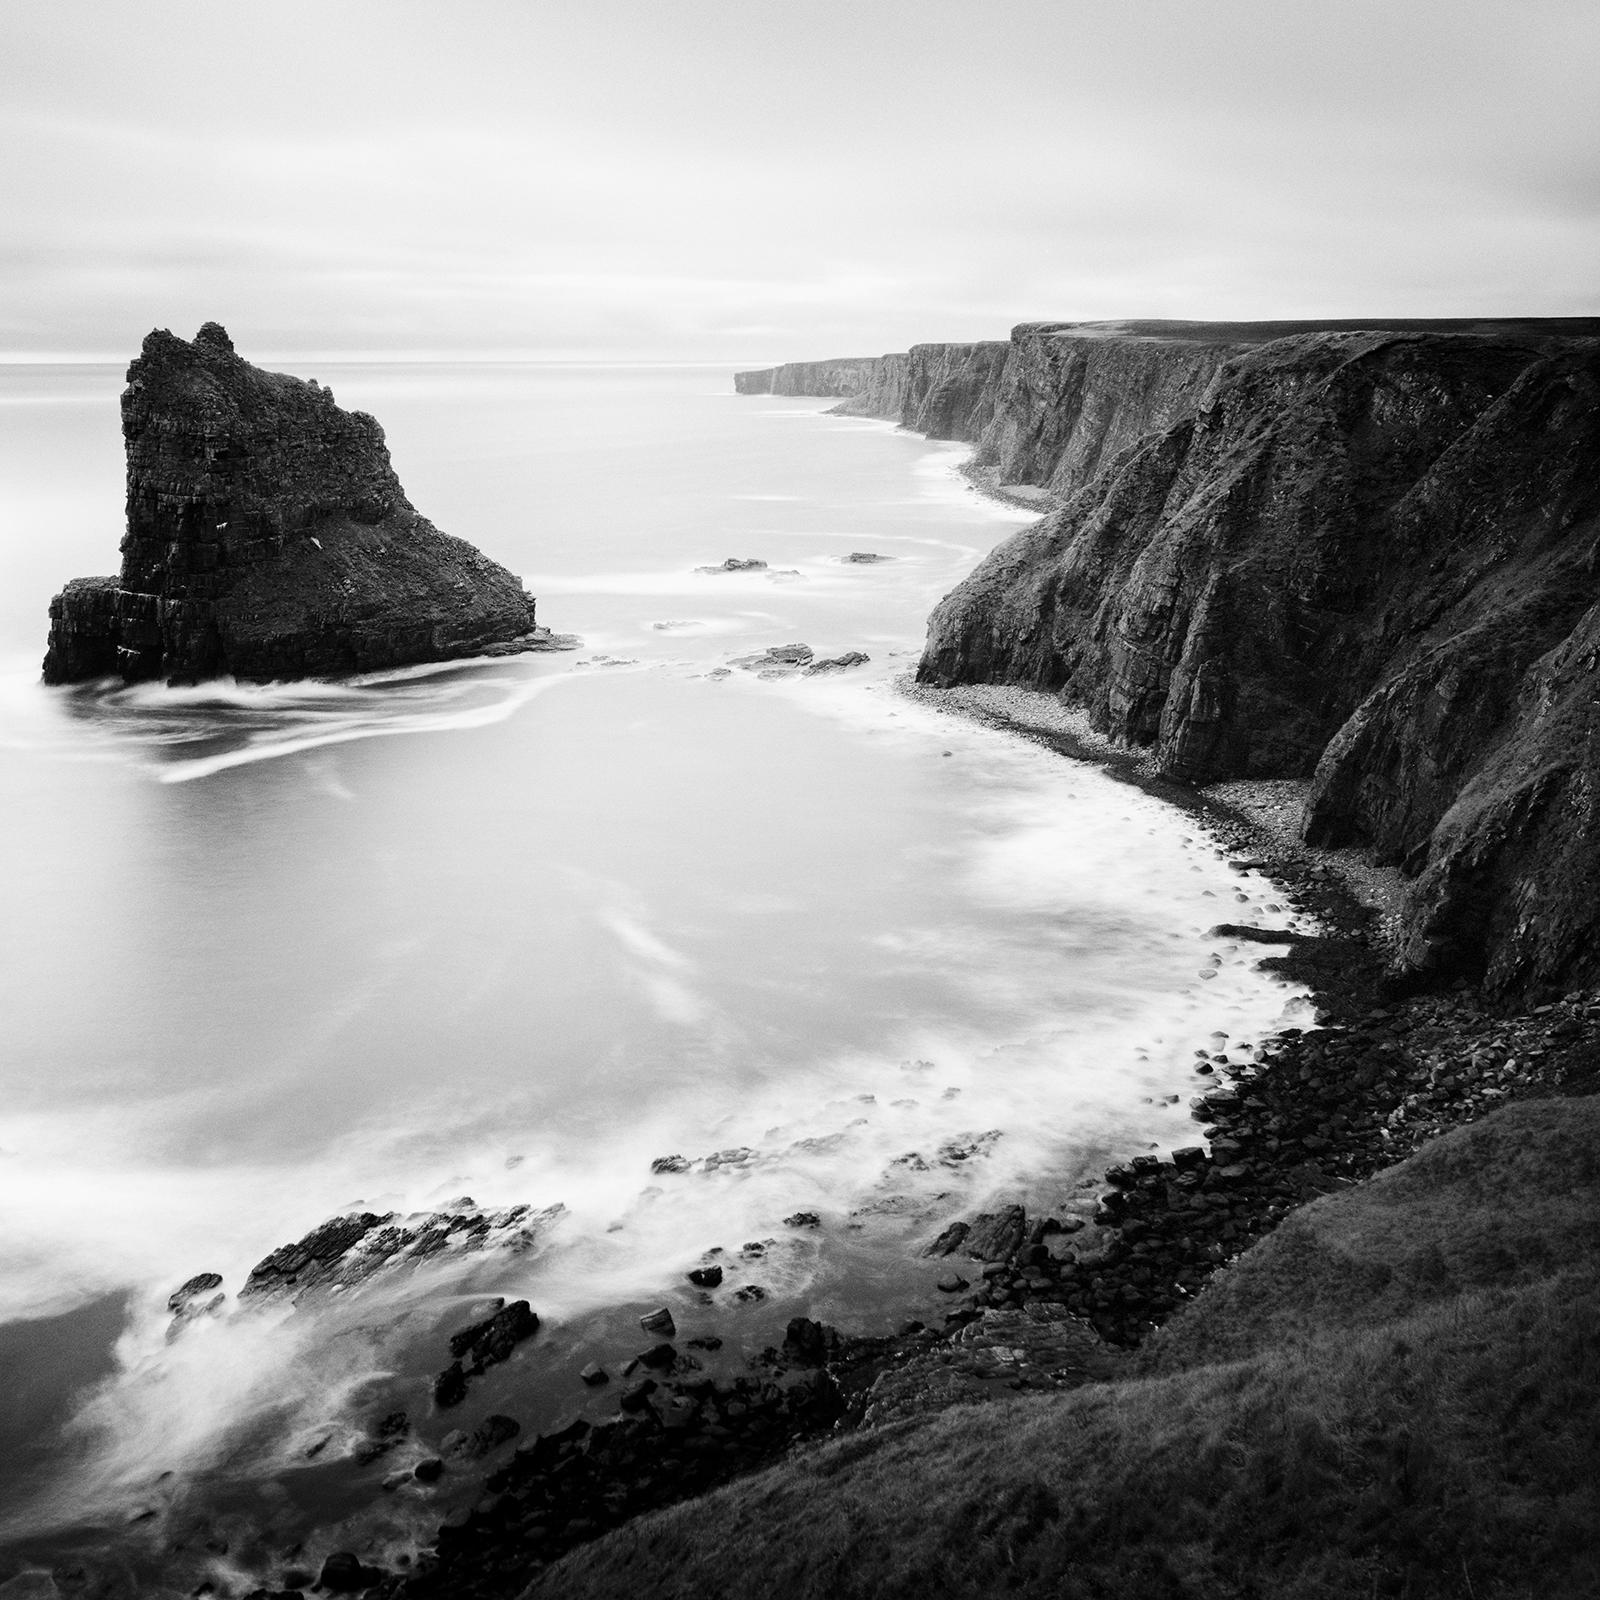 Surreal Moment, Cliff, Island, Scotland, black and white photography, landscape For Sale 1